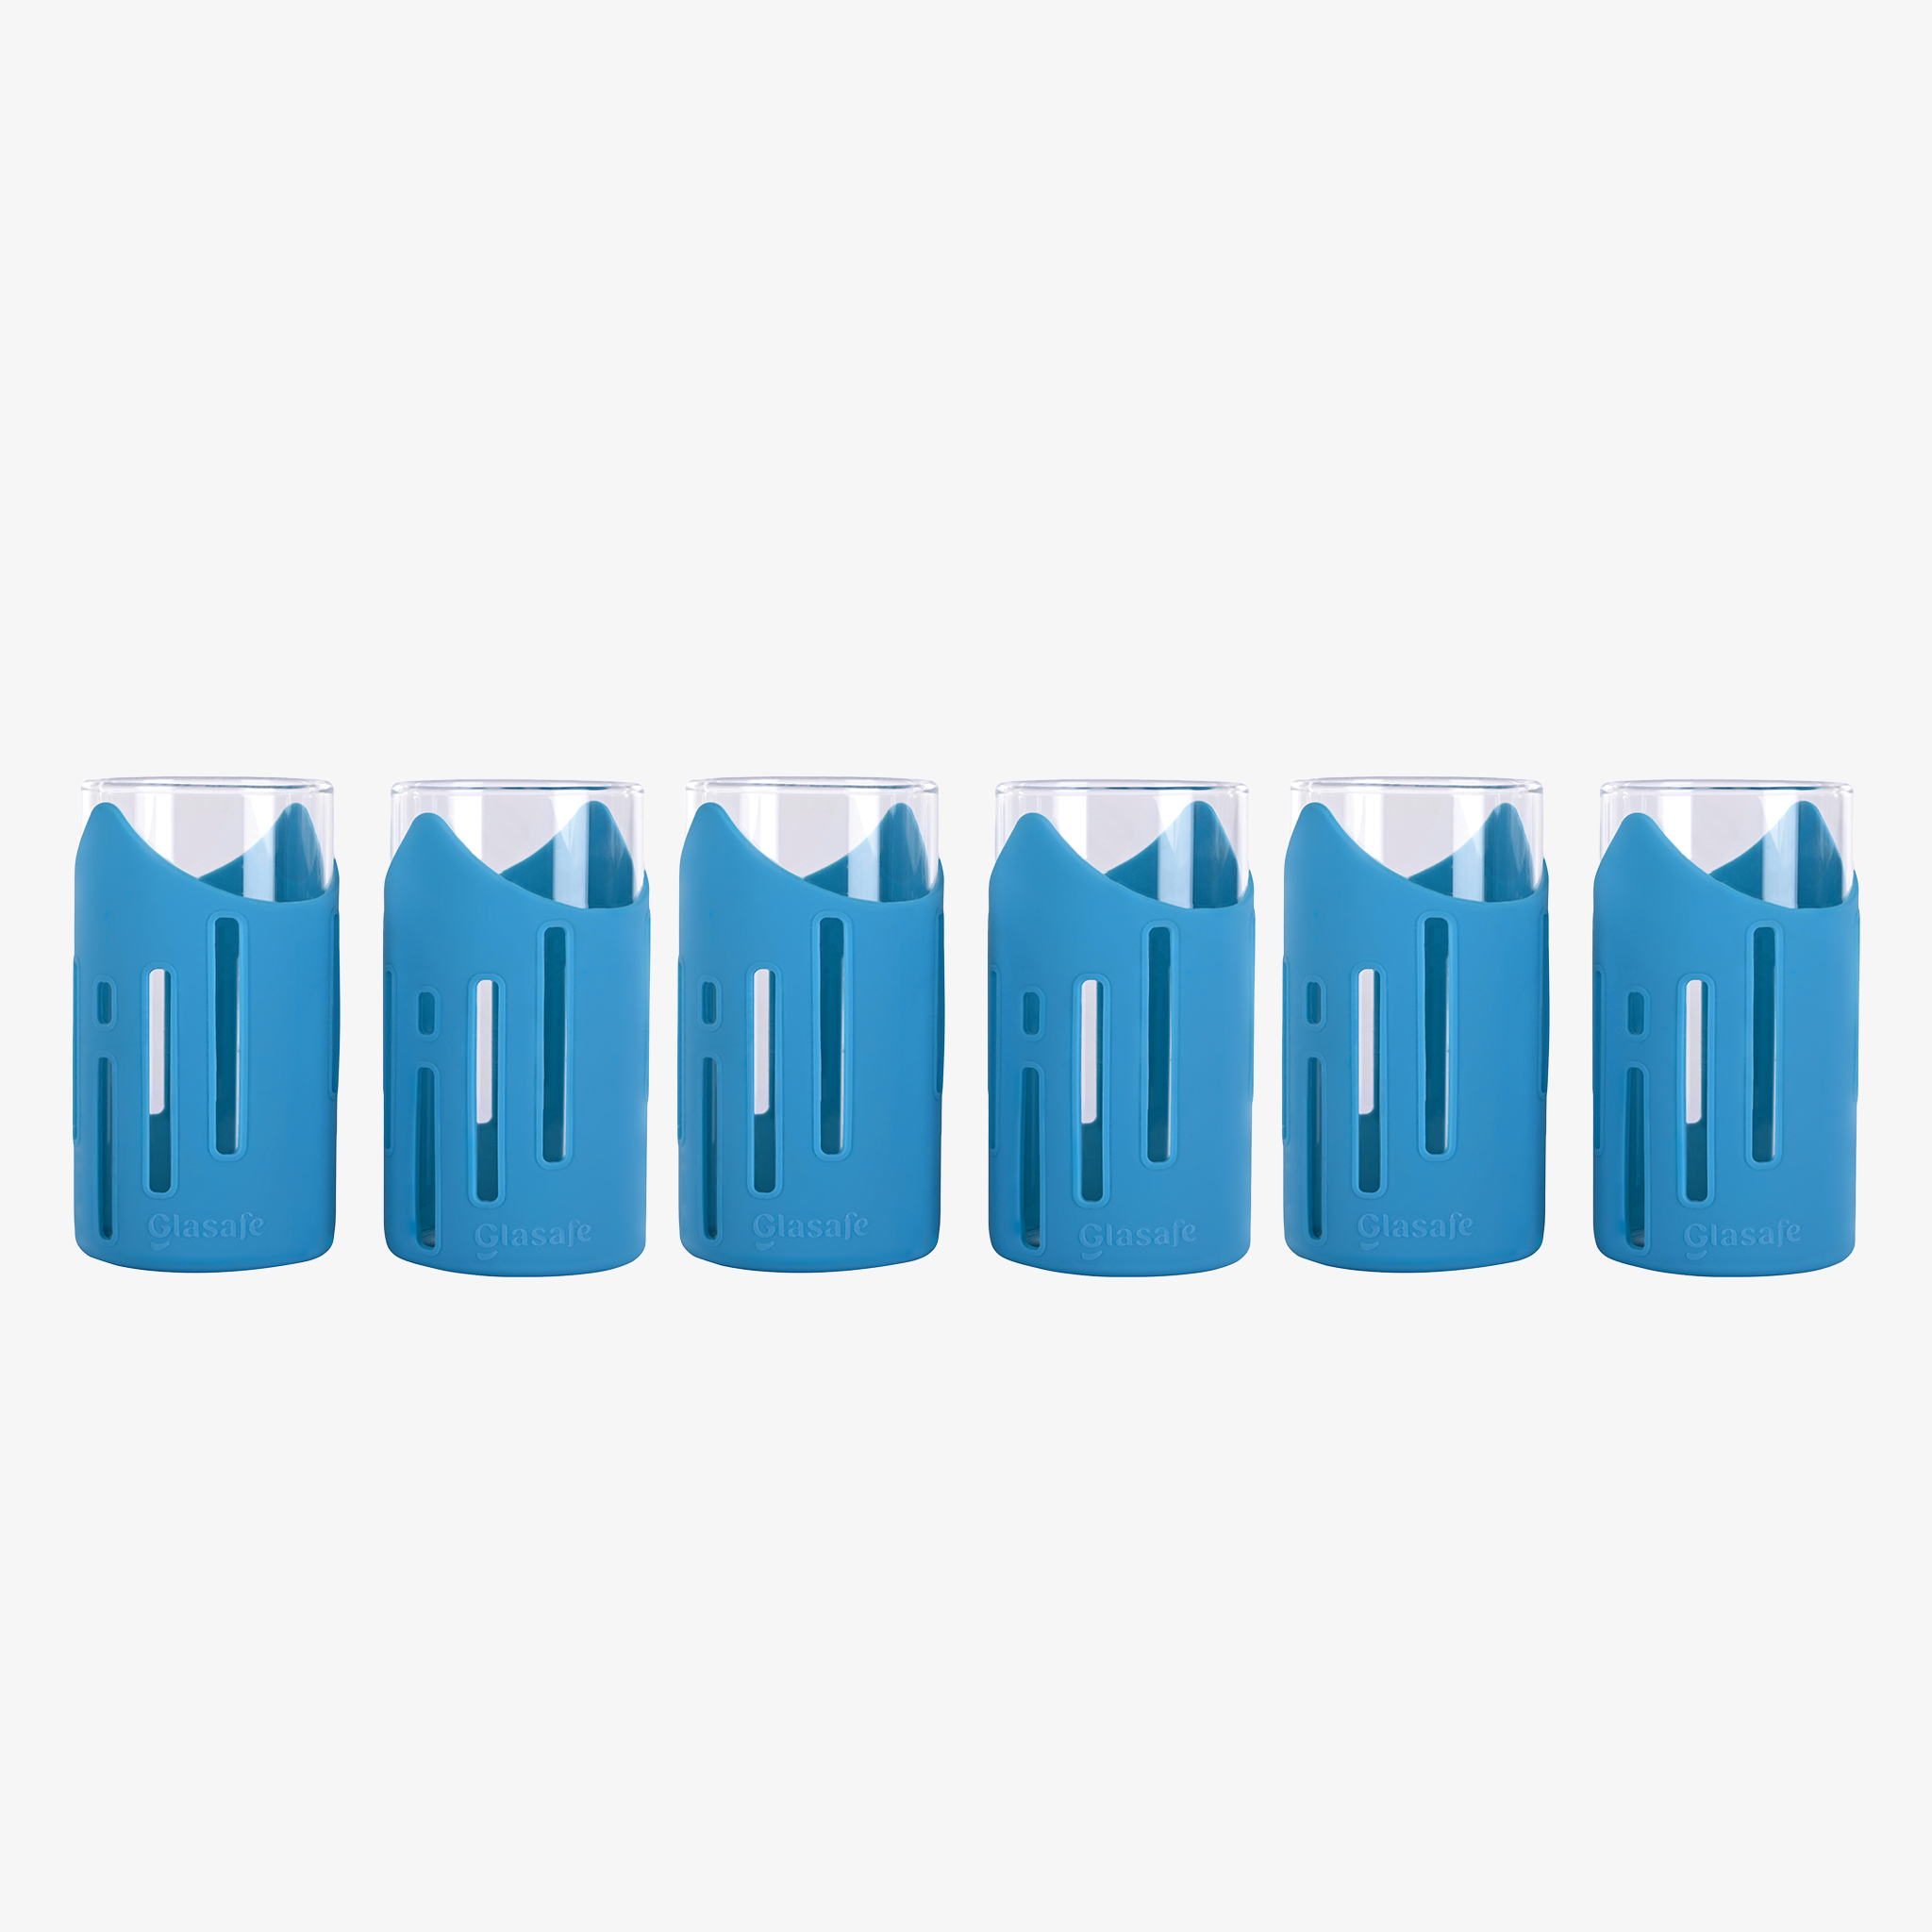 Glasafe Grip 'N' Sip Borosilicate Drinking Glass with Silicone Sleeve- Set of 6 (Tranquil Teal)